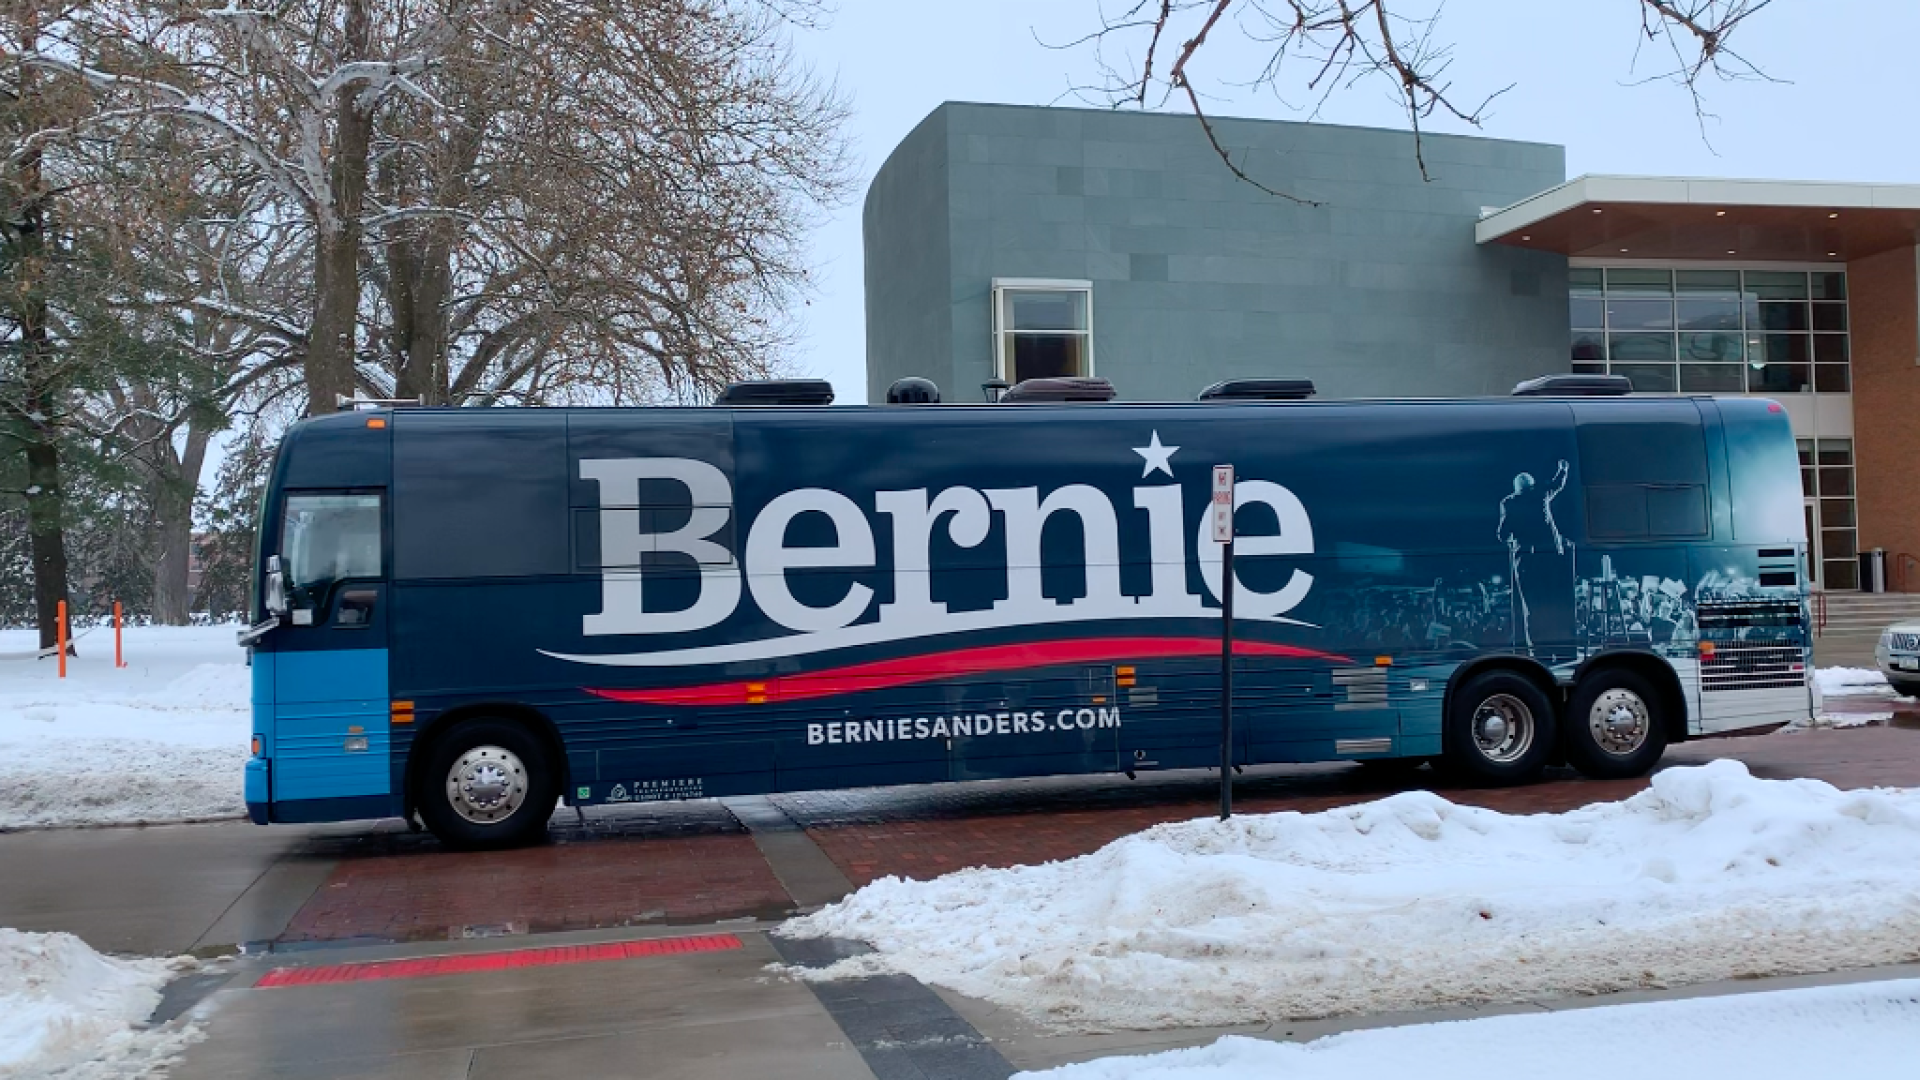 Bernie's Bus stopped by in Grinnell!